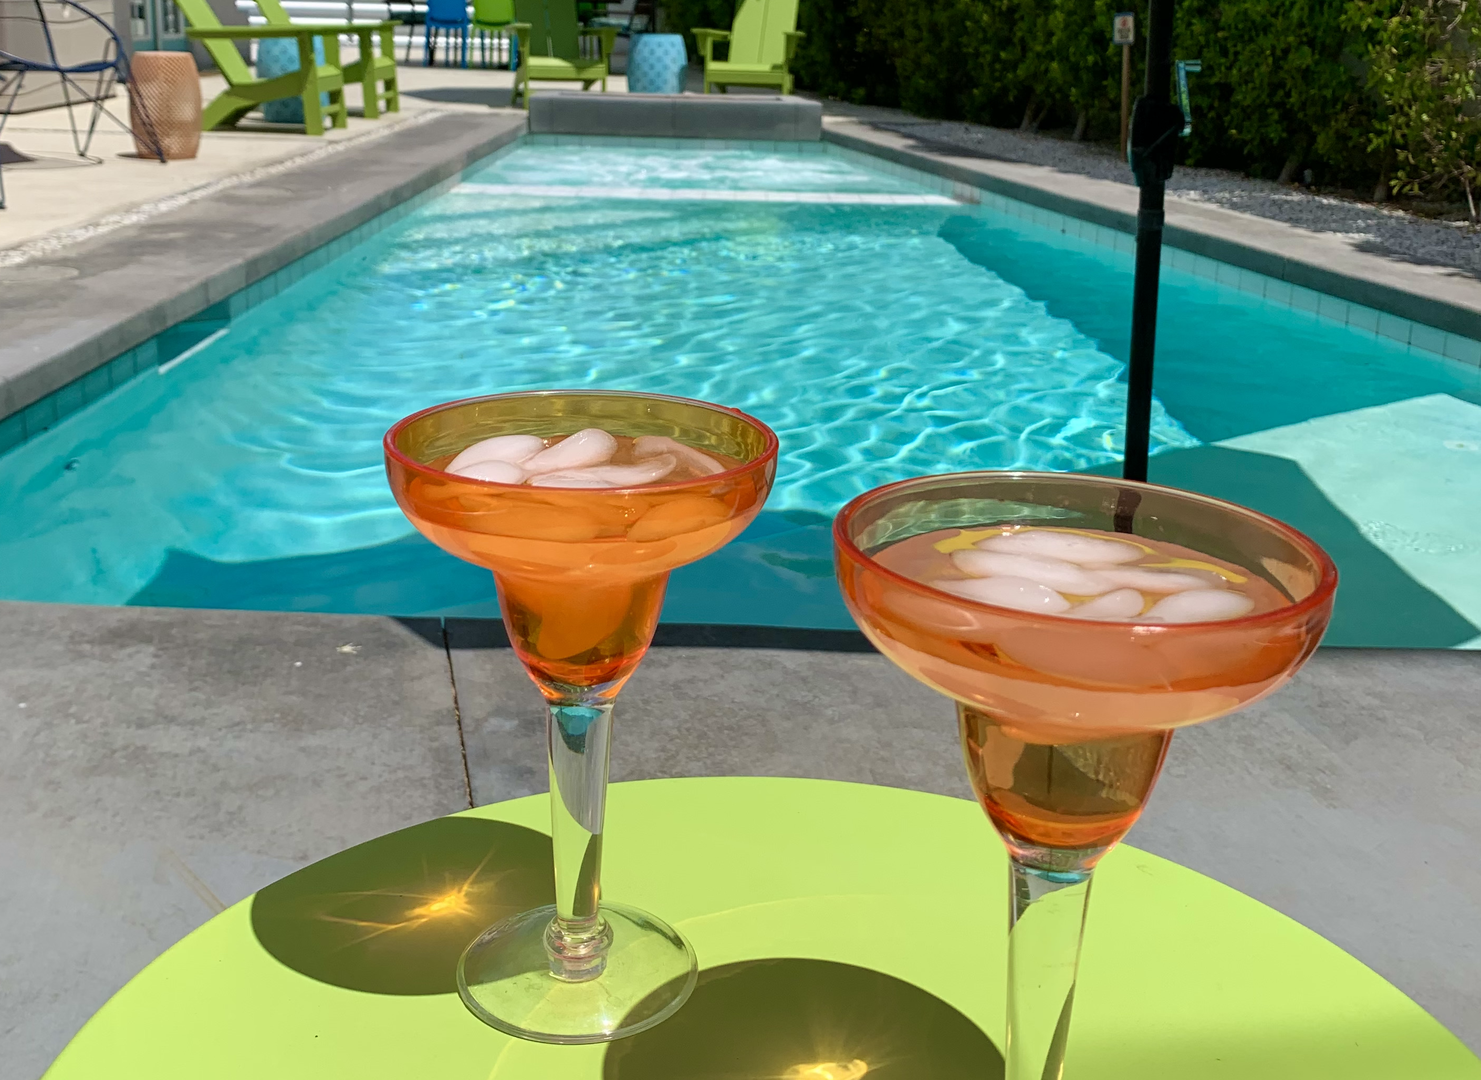 Drinks by the pool anyone?